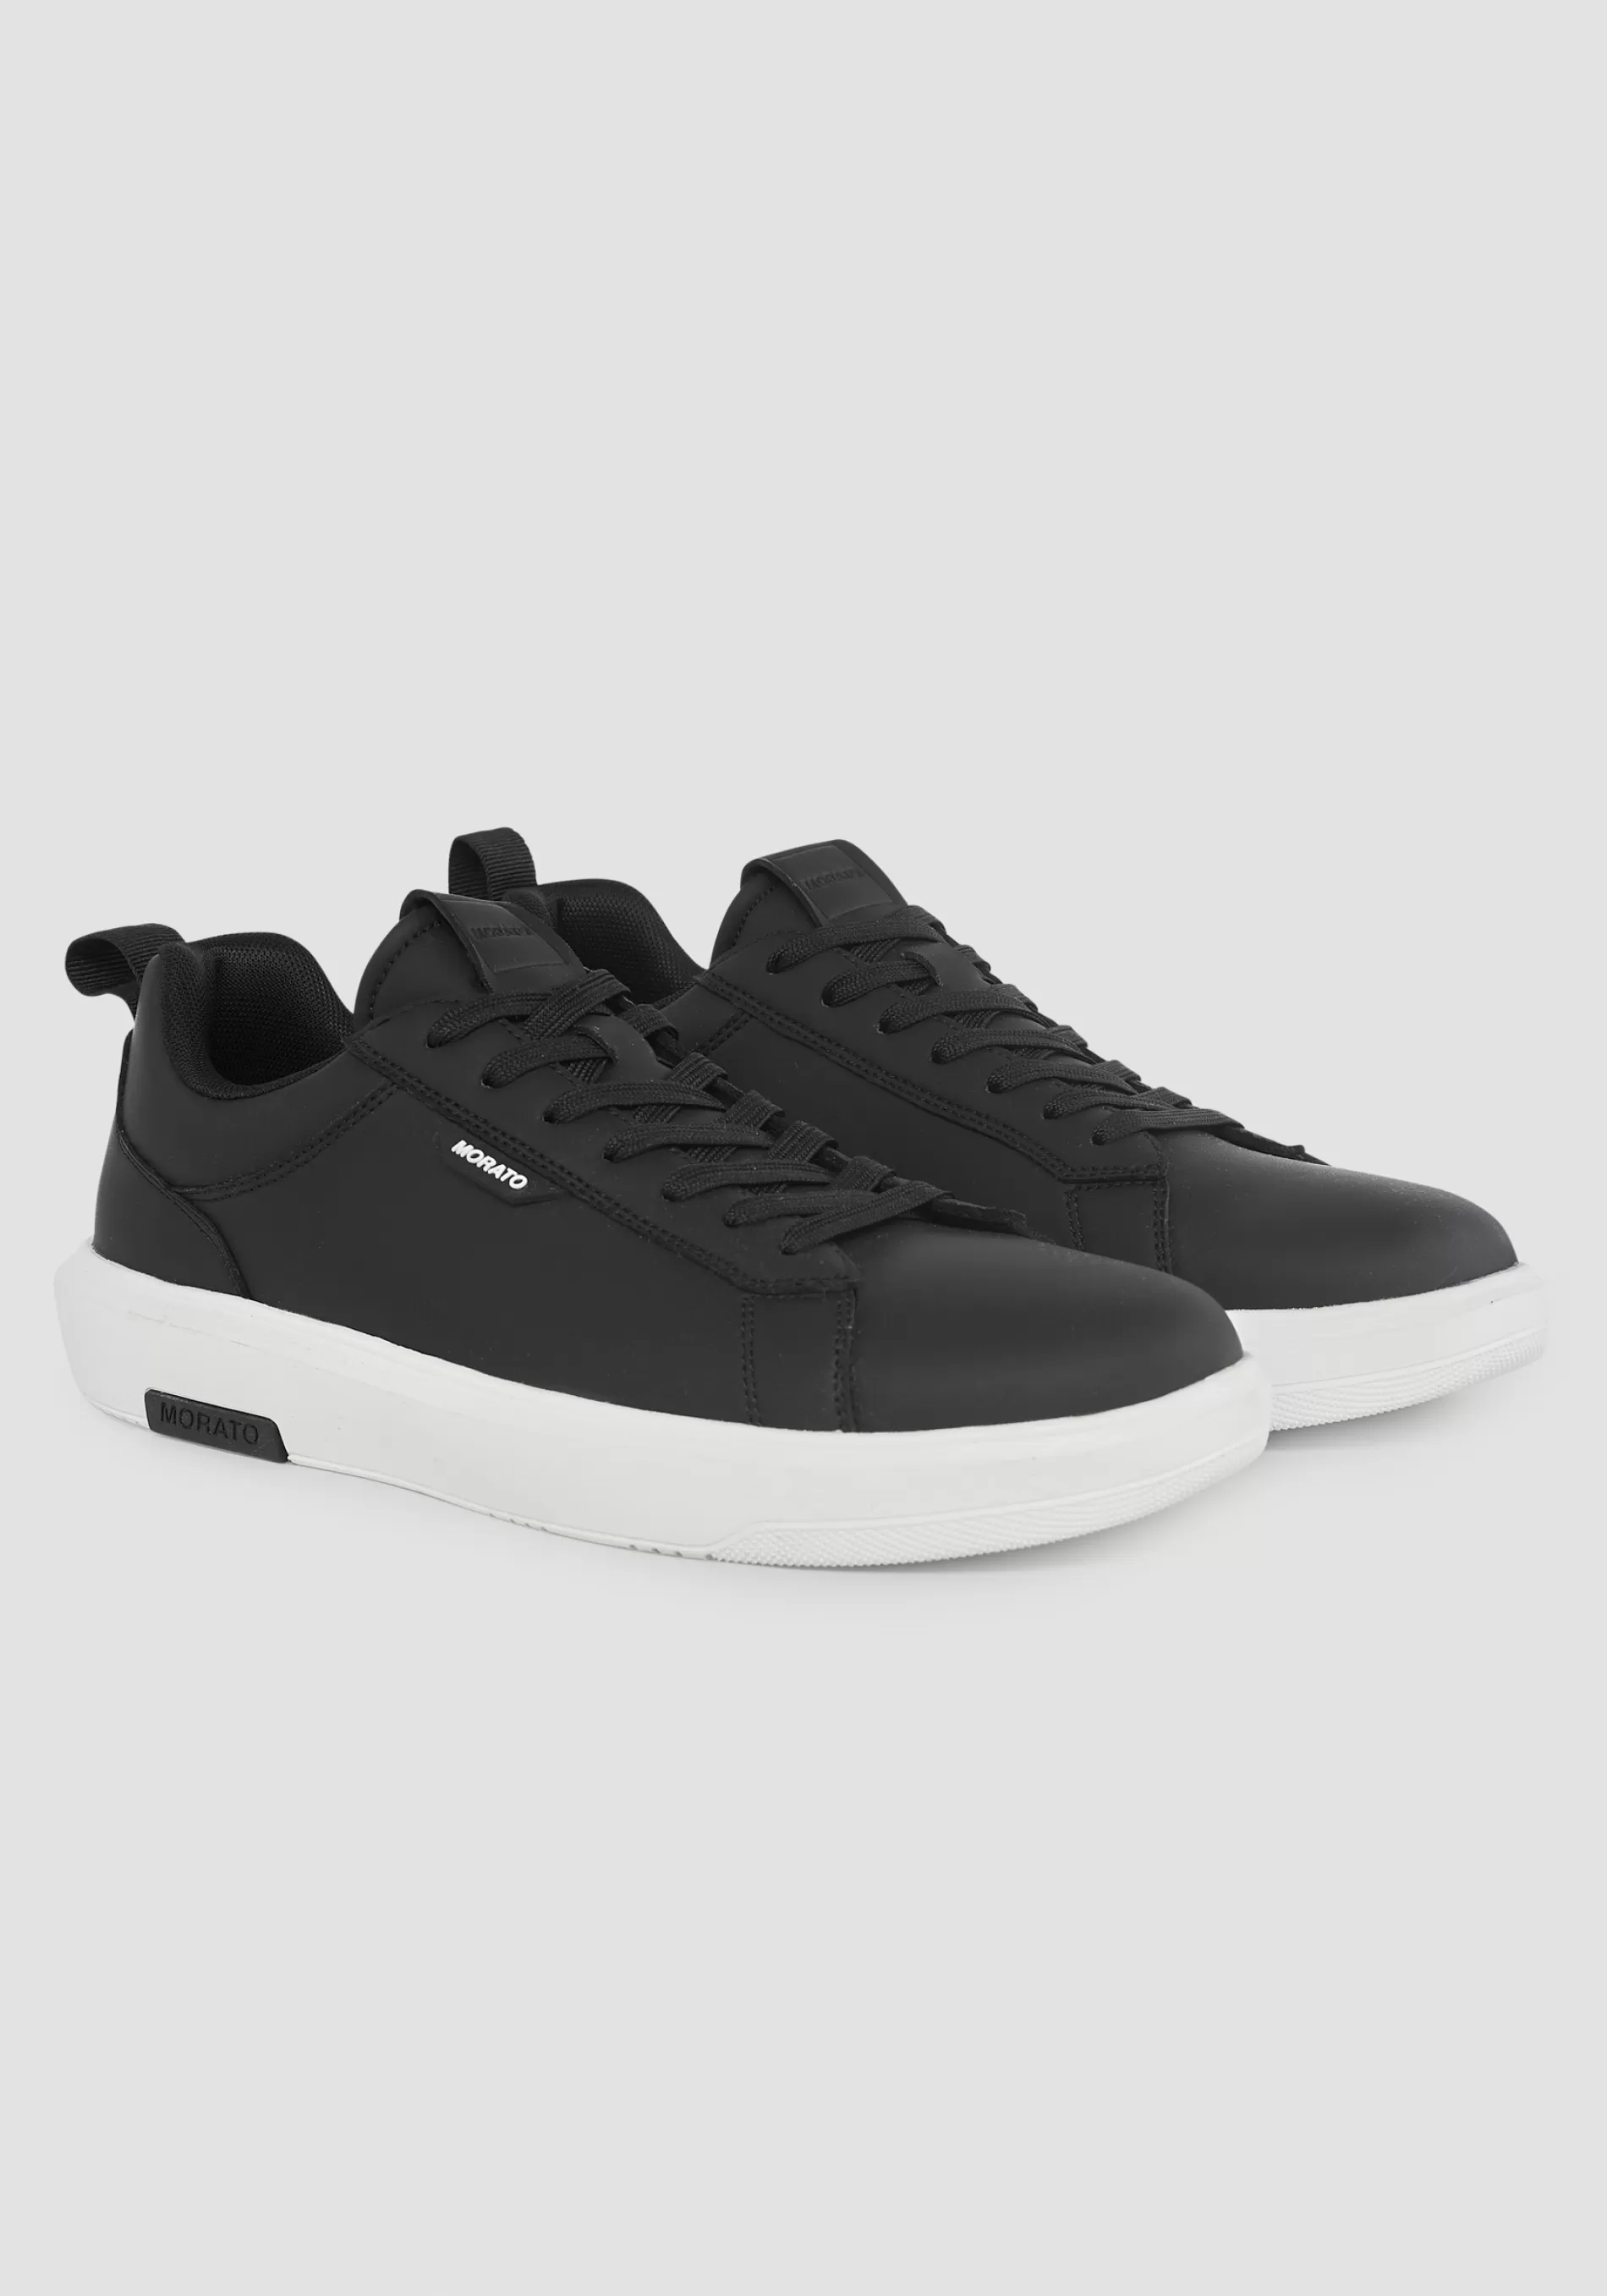 Store "MADISON" LOW-TOP SNEAKER IN FAUX LEATHER Sneakers